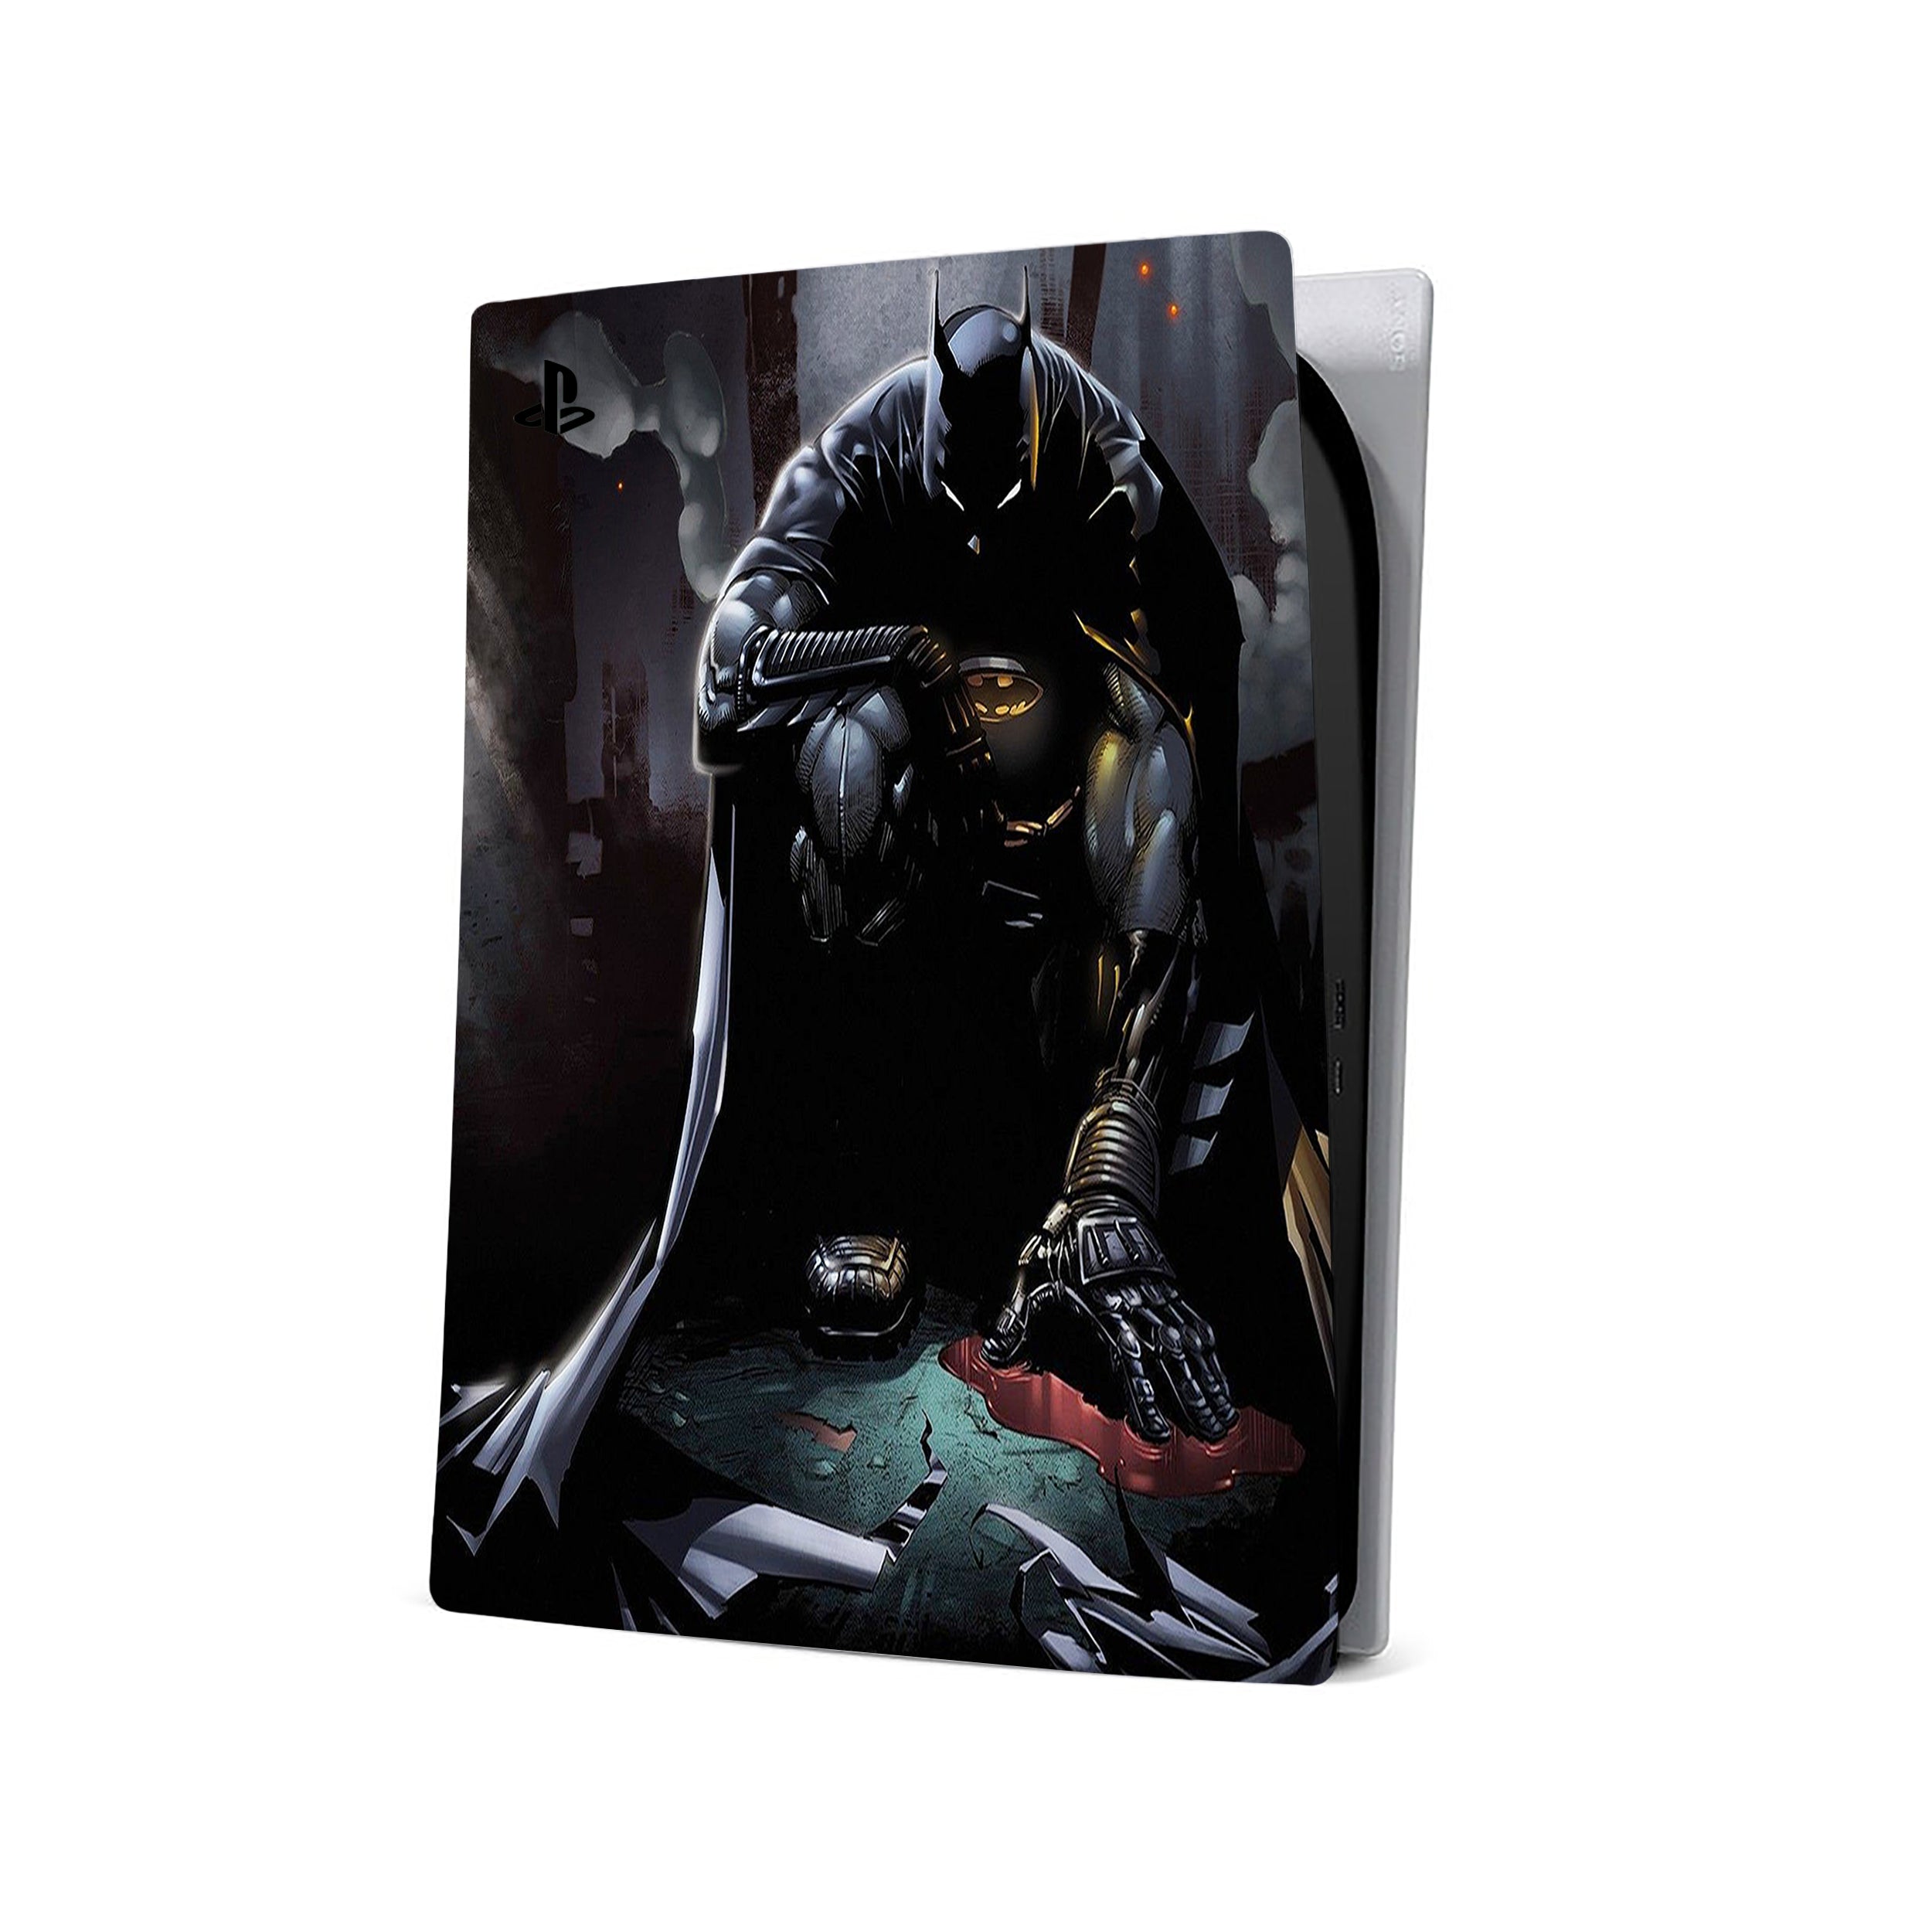 A video game skin featuring a DC Comics Batman design for the PS5.